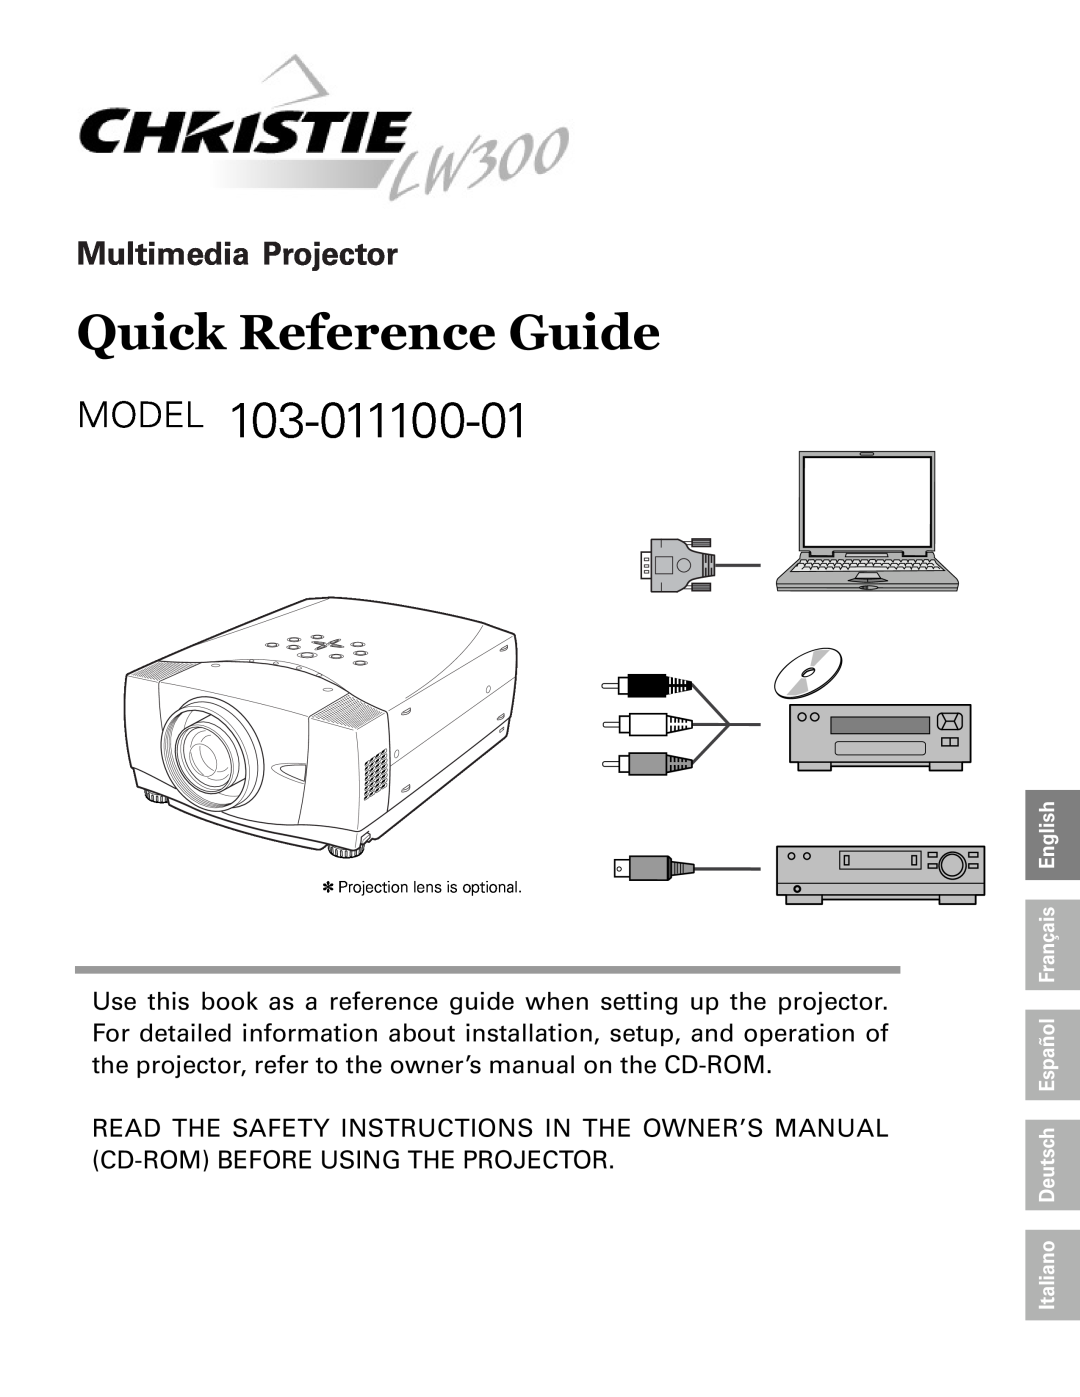 Christie Digital Systems 103-011100-01 owner manual Quick Reference Guide, Model, Multimedia Projector 